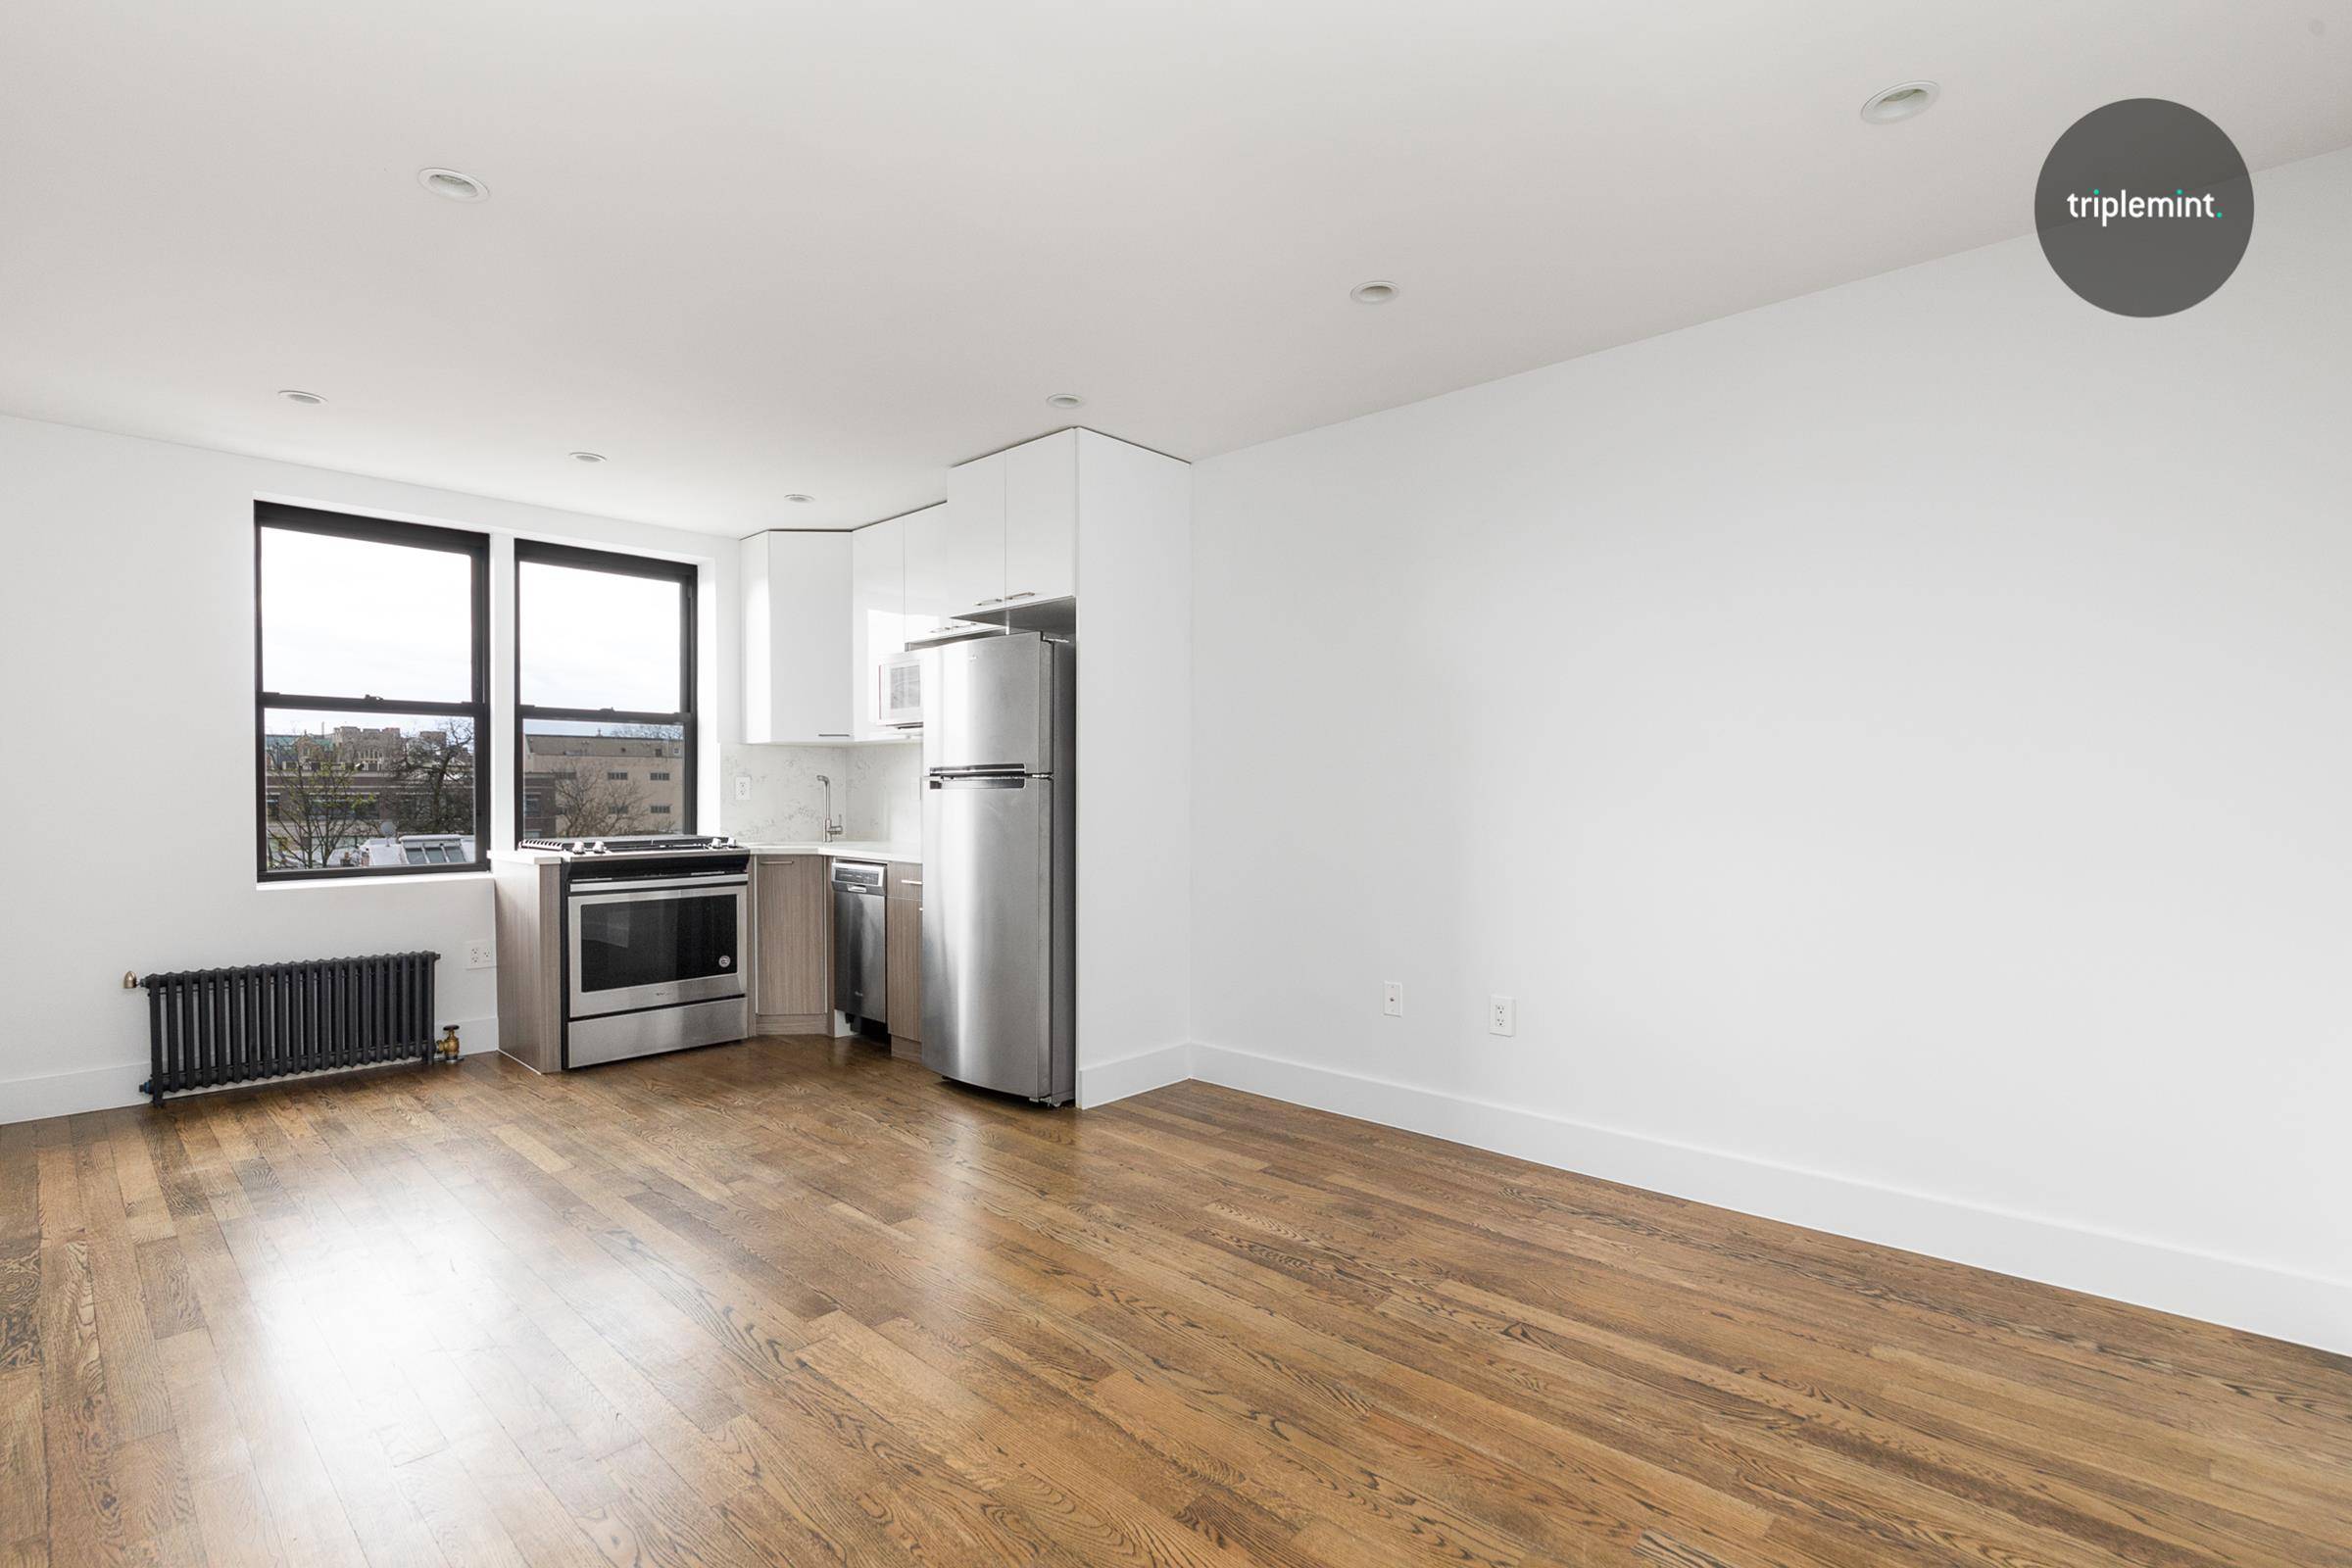 A huge brand new 2 bedroom apartment 10 minutes away from Prospect Park.